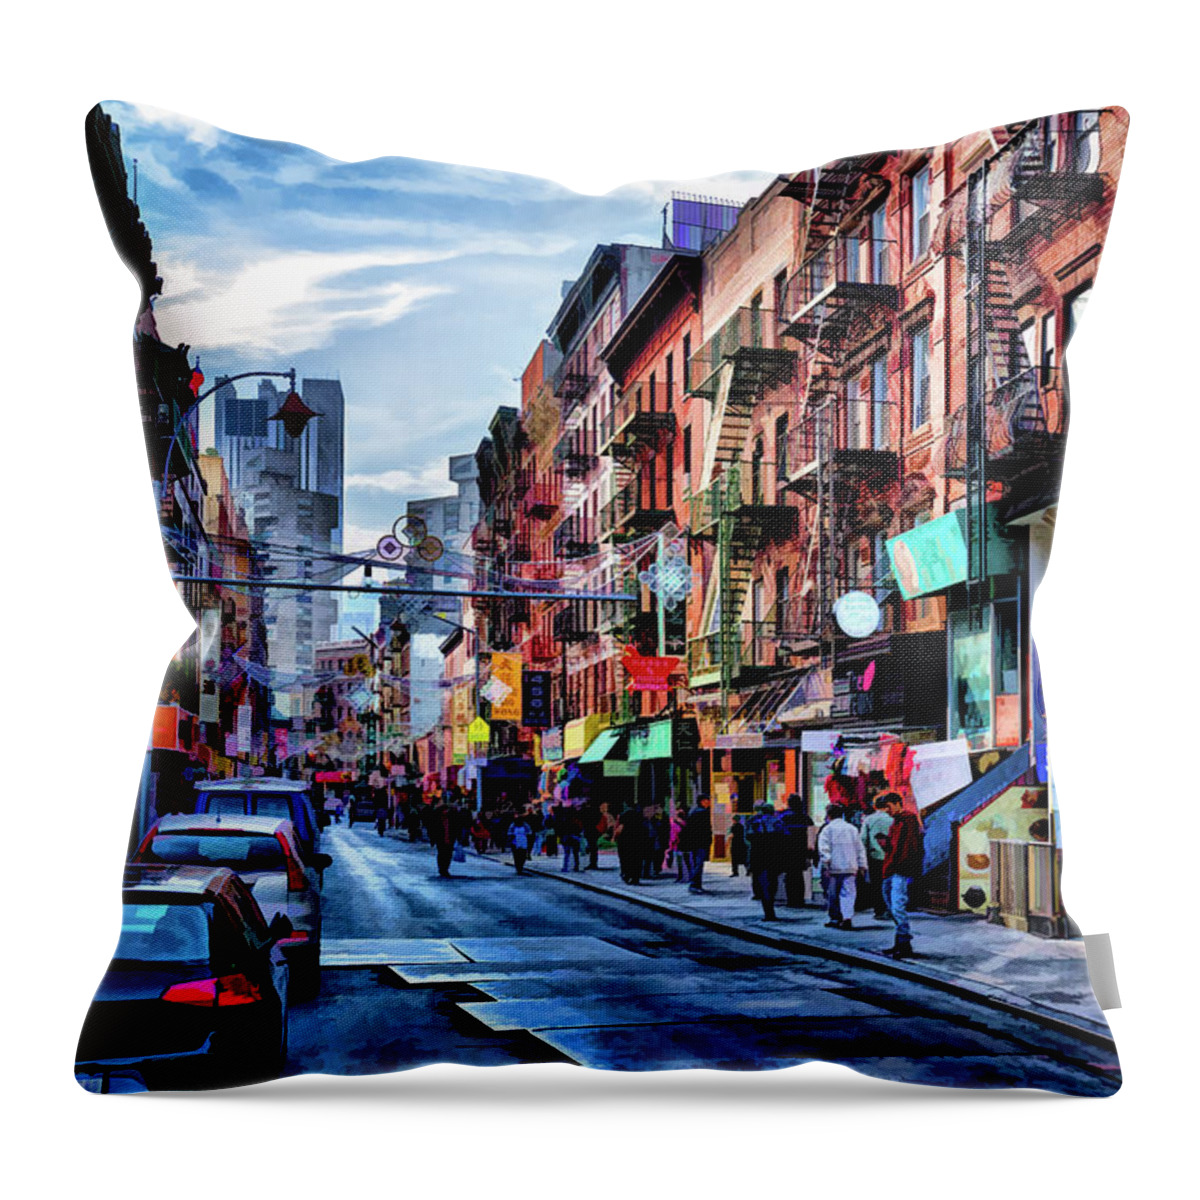 New York Throw Pillow featuring the painting New York City Chinatown by Christopher Arndt